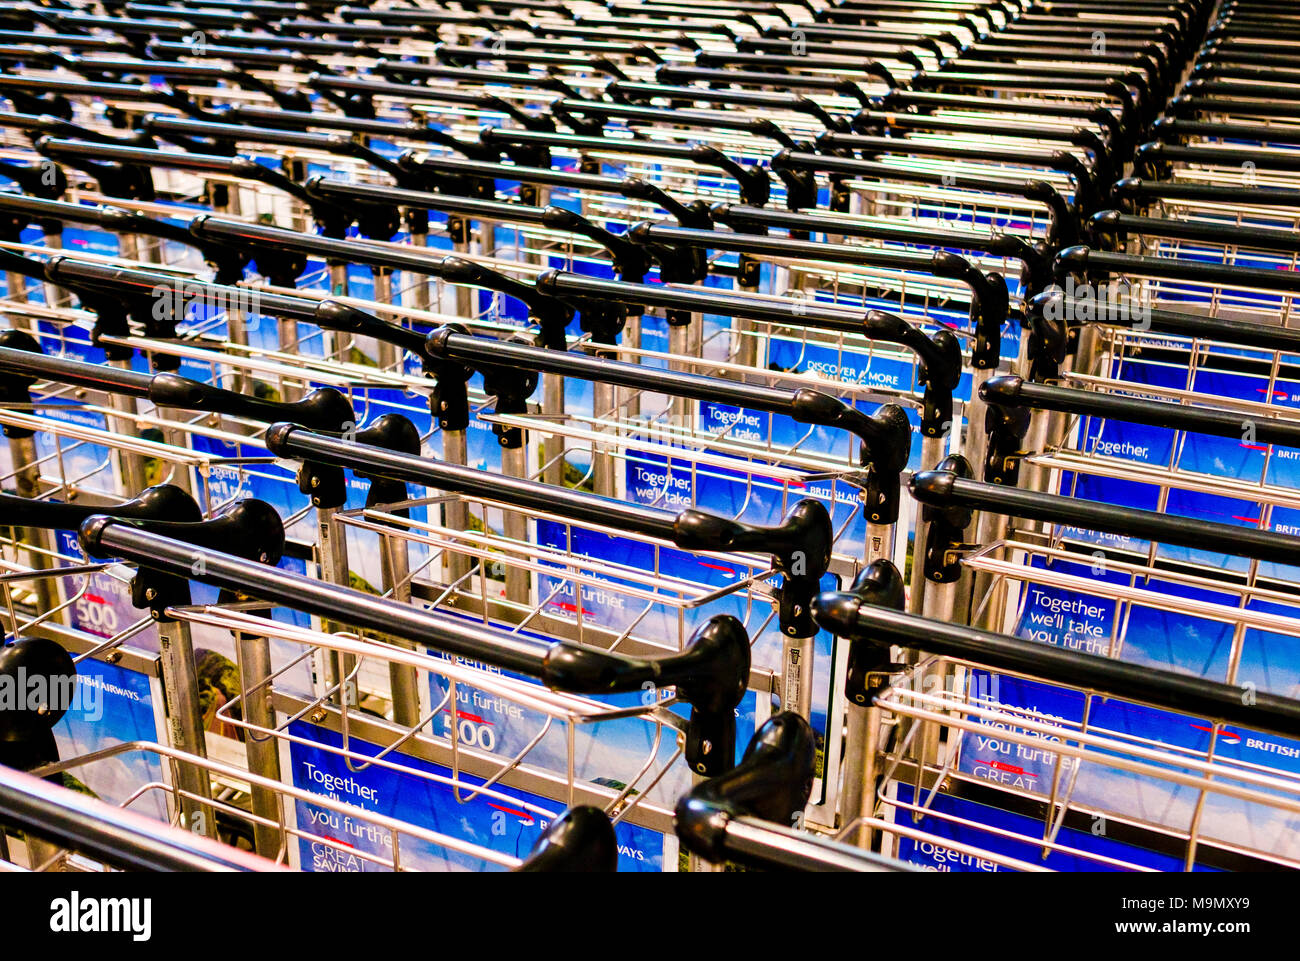 Baggage carts in line, Heathrow Airport, London, England, Great Britain Stock Photo